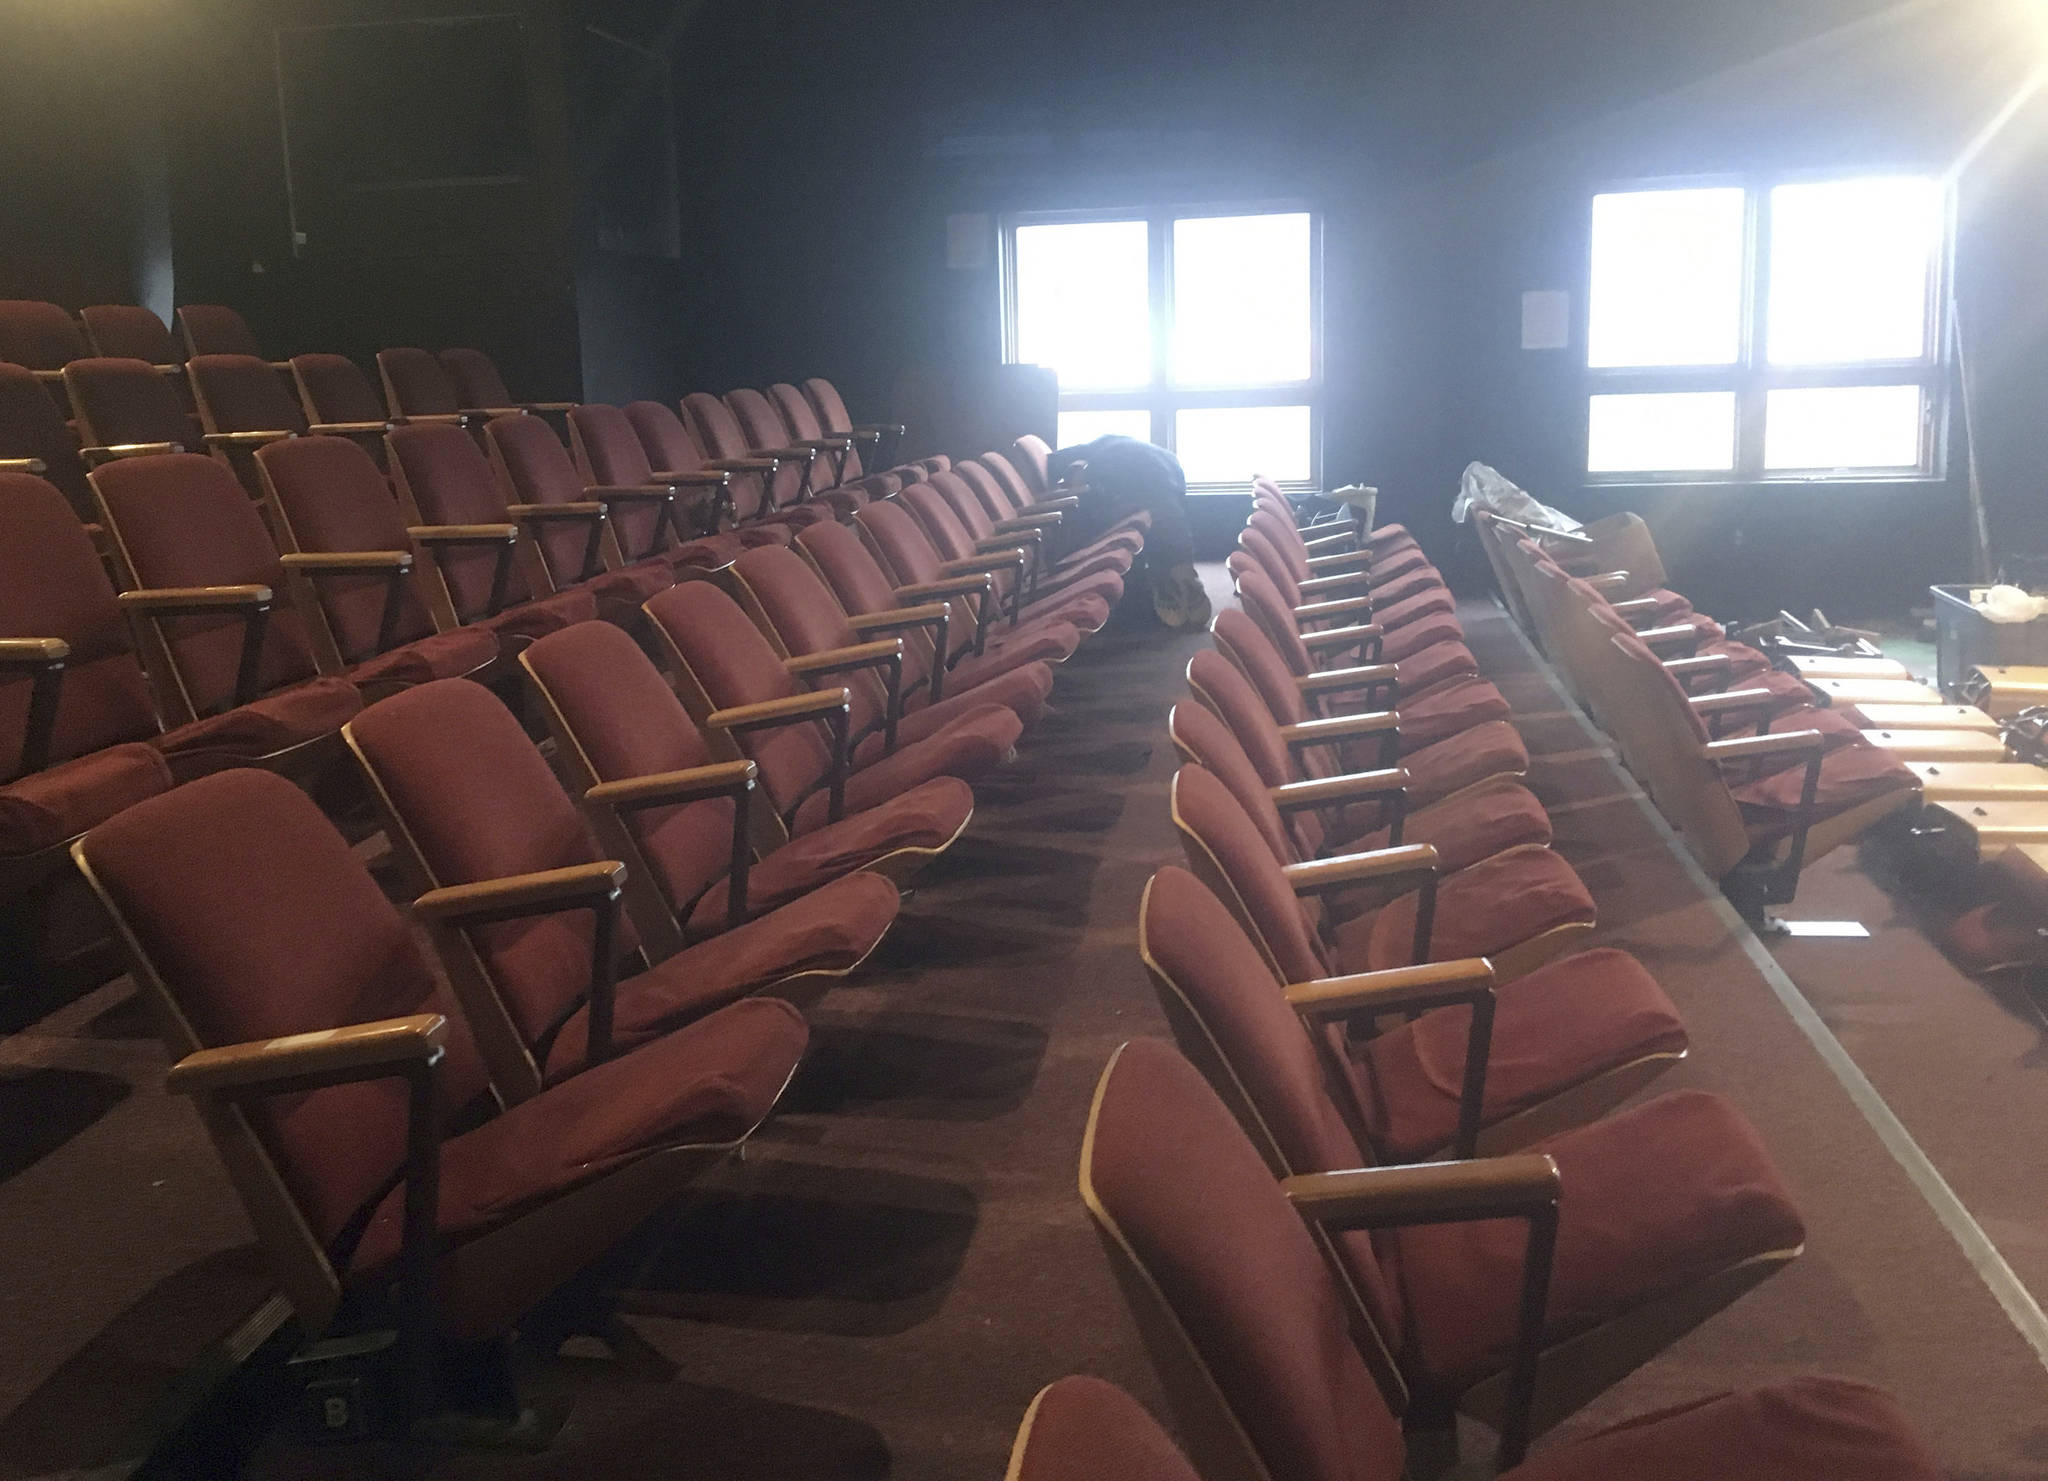 In this Monday, Oct. 30, 2017 photo, Martin Buser unfastens theater seats in the theater at the Alaska Fine Arts Academy in Eagle River, Alaska. The seats were being removed as the theater vacated the space, which had been its home for 11 years. A board member said the arts academy is in the process of looking for a new permanent home. (Matt Tunseth/Chugiak-Eagle River Star via AP)